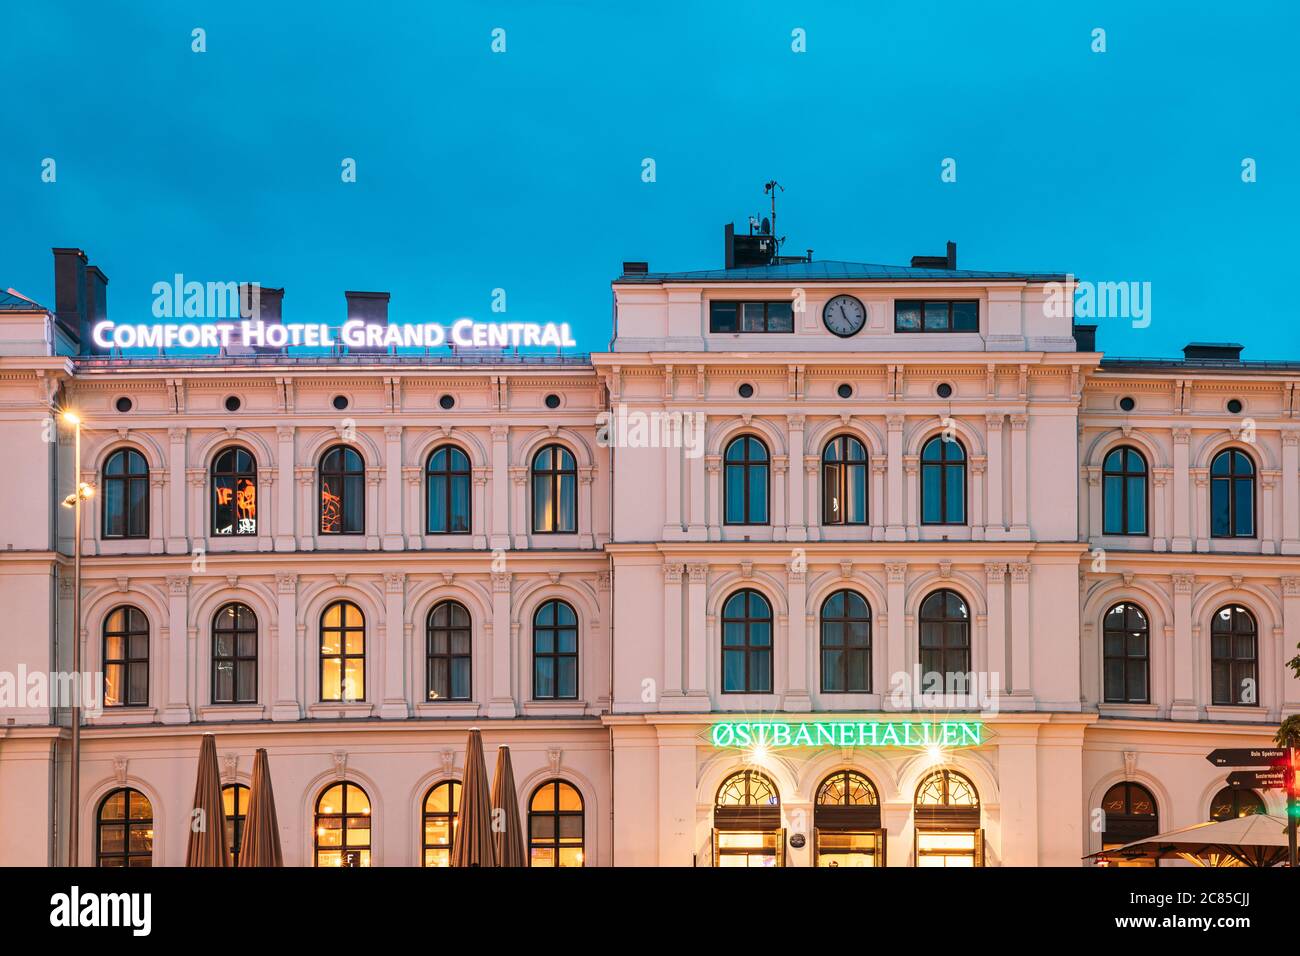 Oslo, Norway. Night View Of Comfort Hotel Grand Central Near Oslo Central  Station Railway Station Stock Photo - Alamy